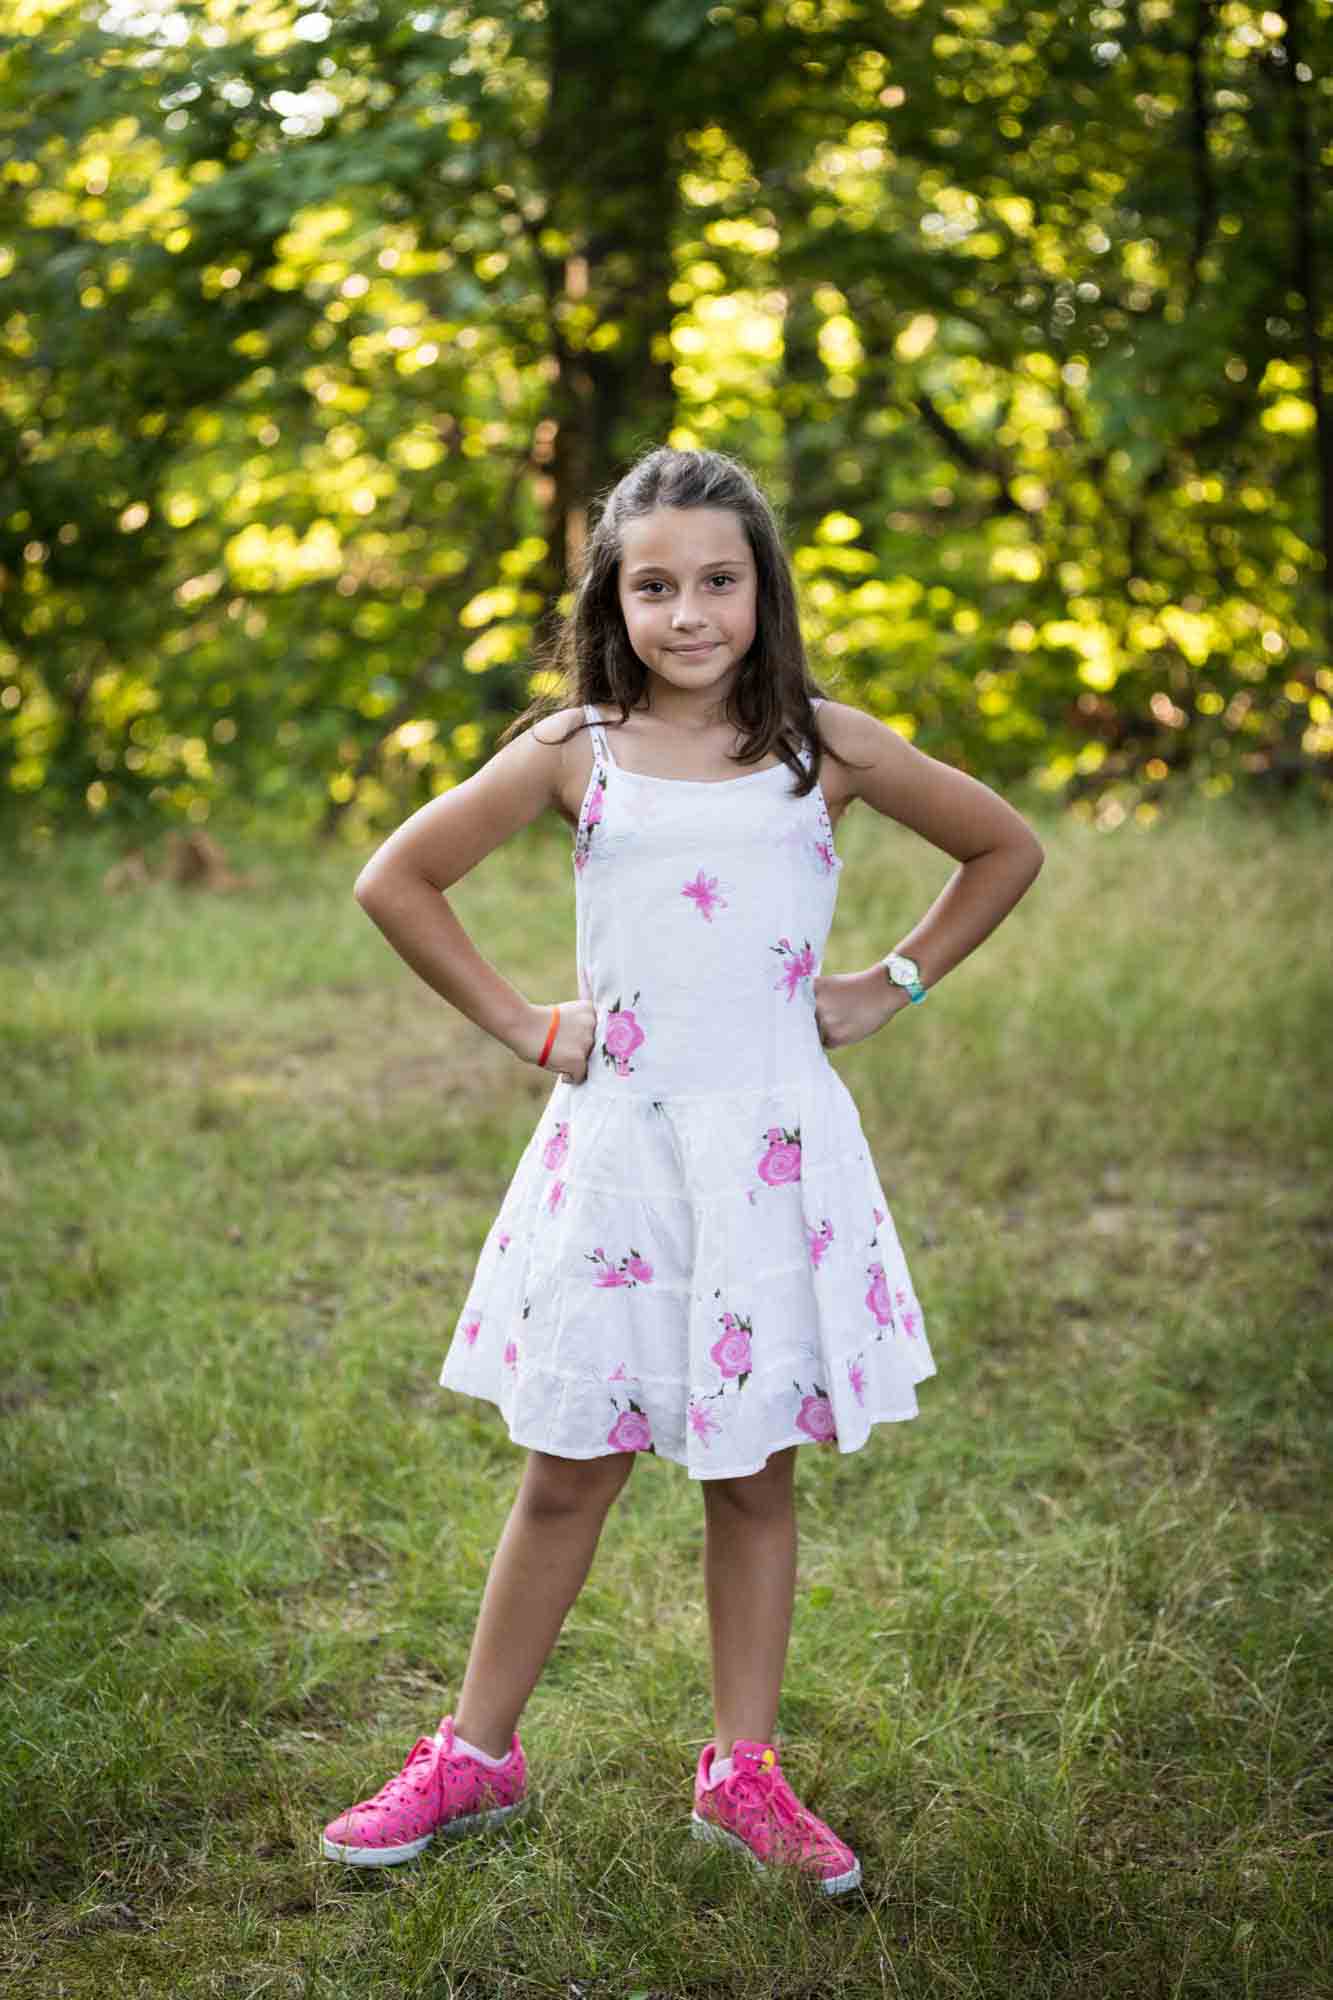 Young girl wearing pink flower dress with hands on hips during a Forest Park family photo shoot